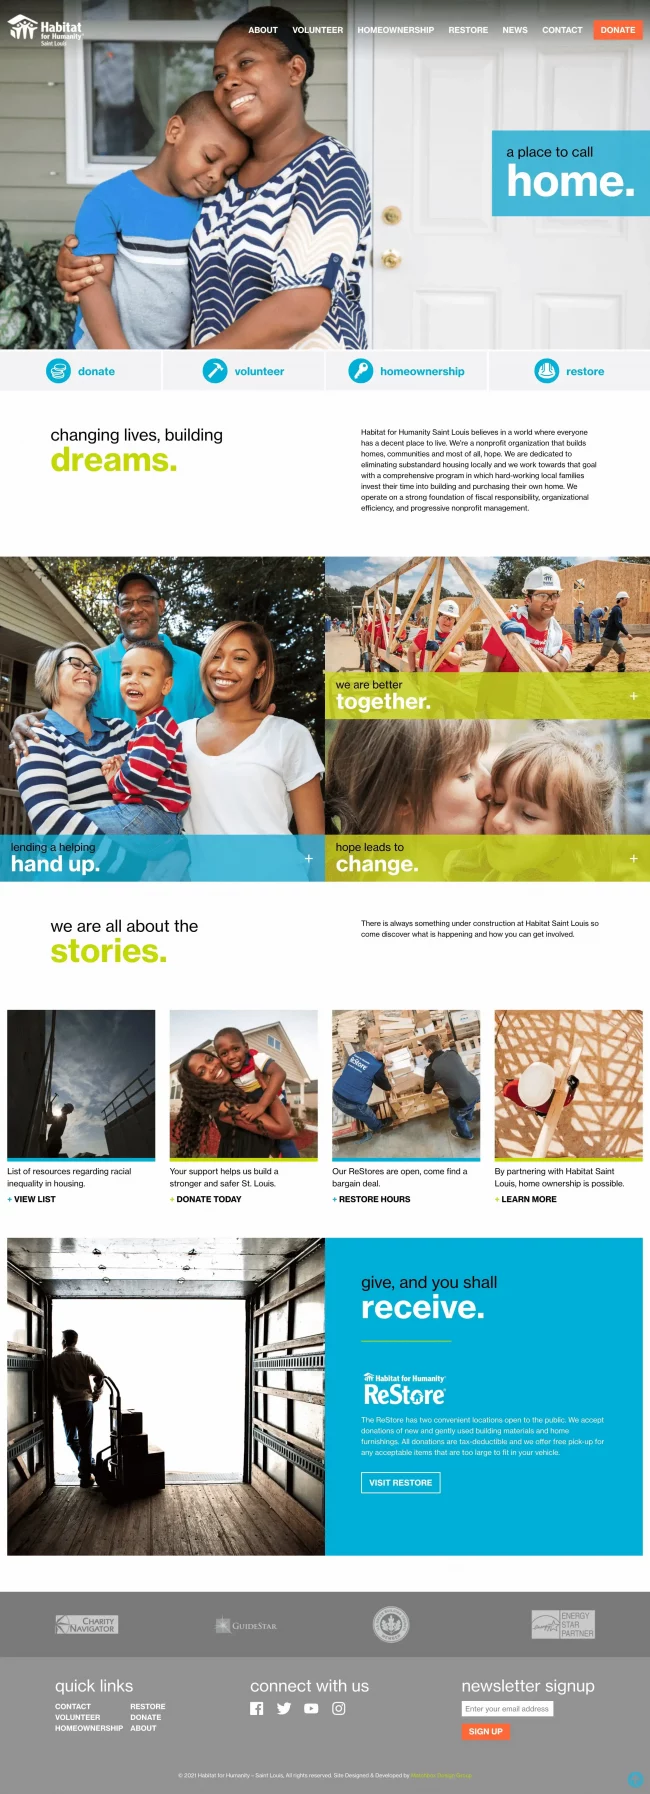 Habitat for Humanity home page